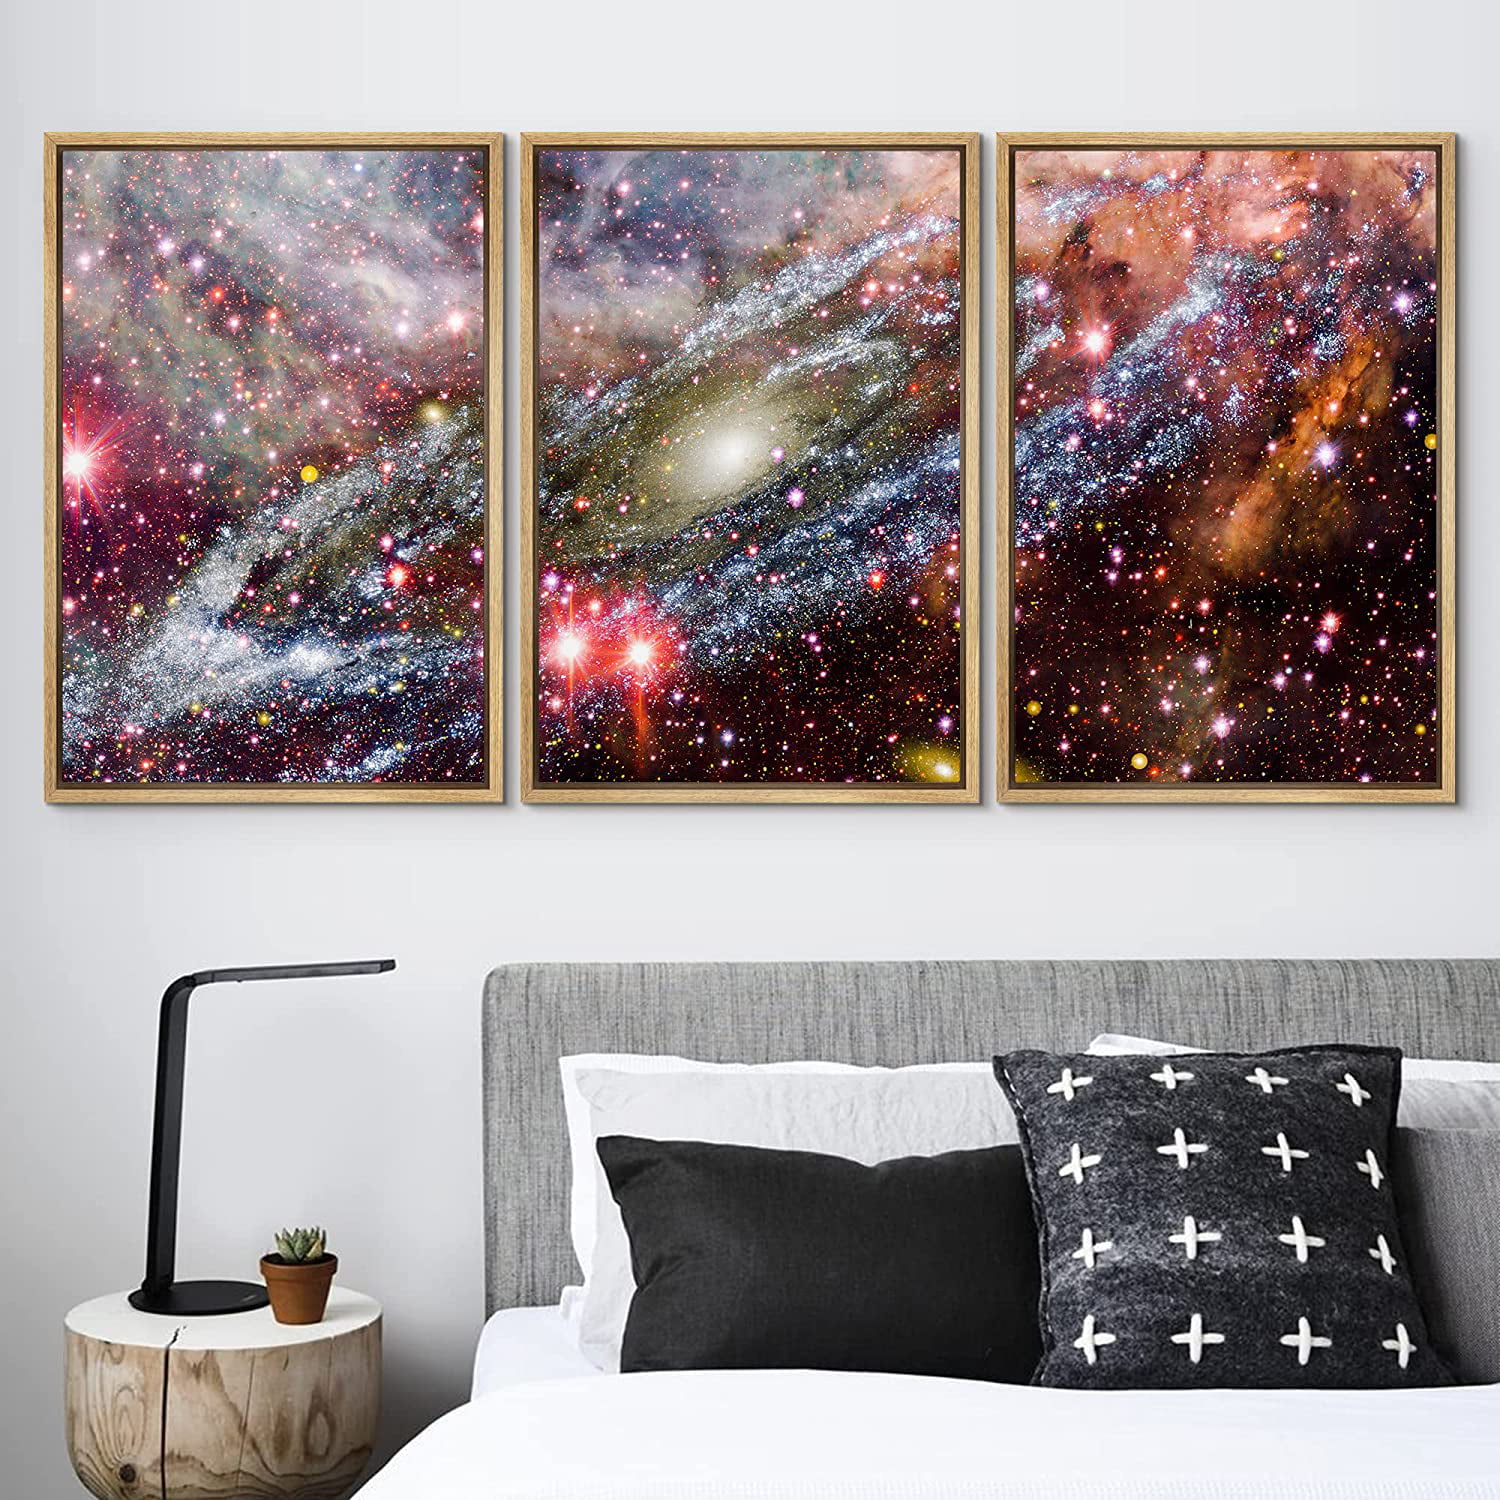 wall26 Framed Canvas Print Wall Art Set Multicolor Spiral Ring Galaxy  Astronomy amp; Space Nature Digital Art Sci-Fi amp; Fantasy Decorative  Landscape for Living Room, Bedroom, Office 16quot;x24